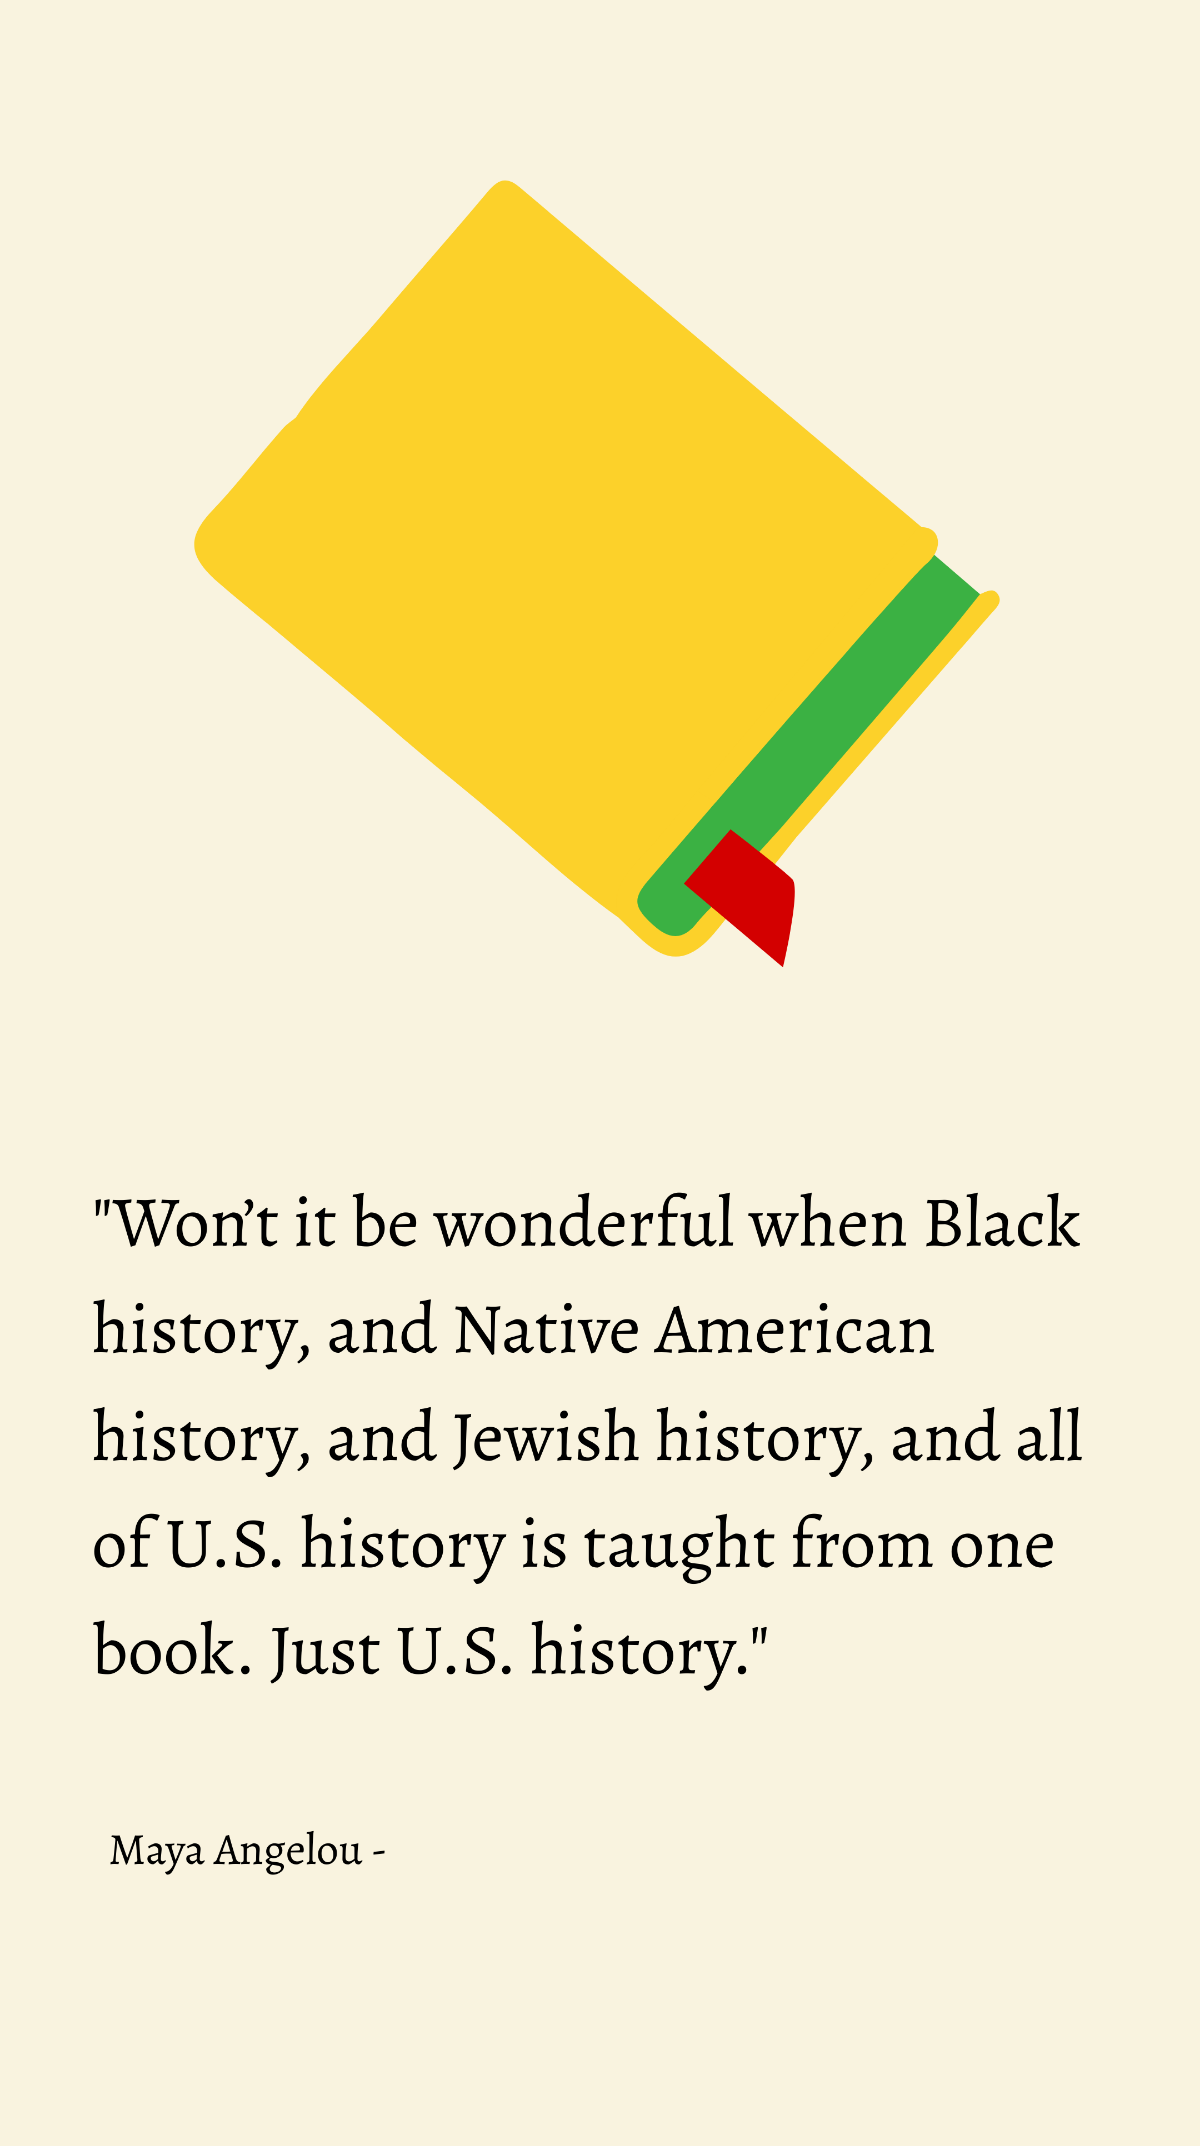 Maya Angelou - Won’t it be wonderful when Black history, and Native American history, and Jewish history, and all of U.S. history is taught from one book. Just U.S. history.